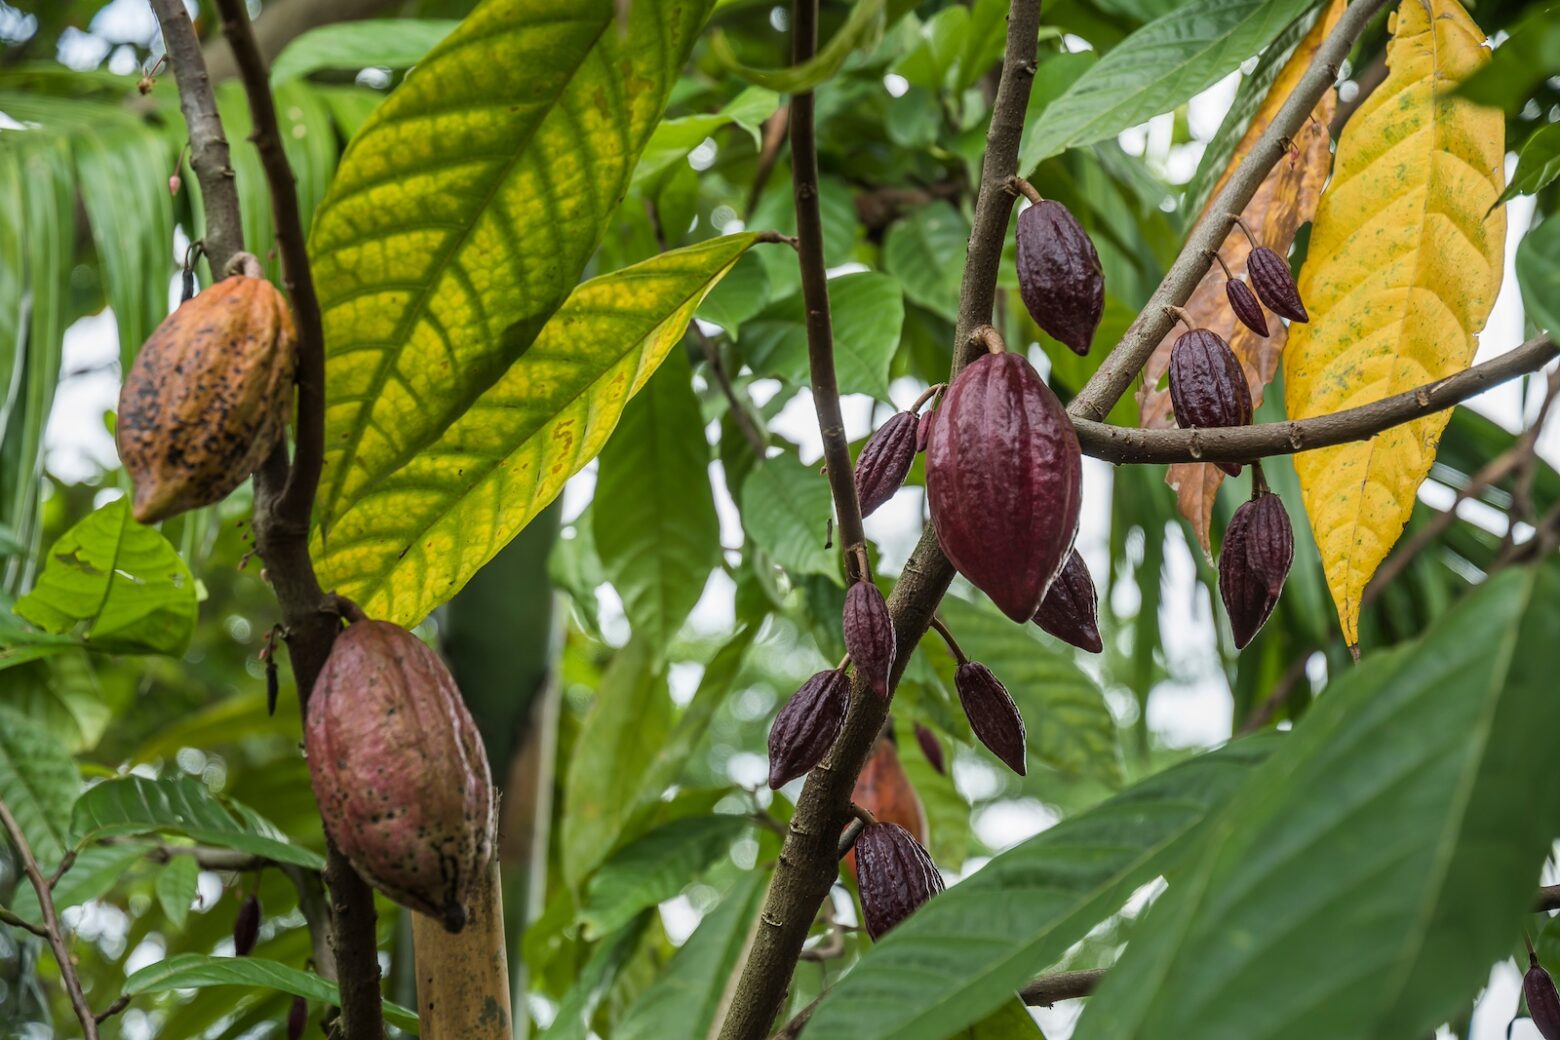 Cacao beans hanging on a tree